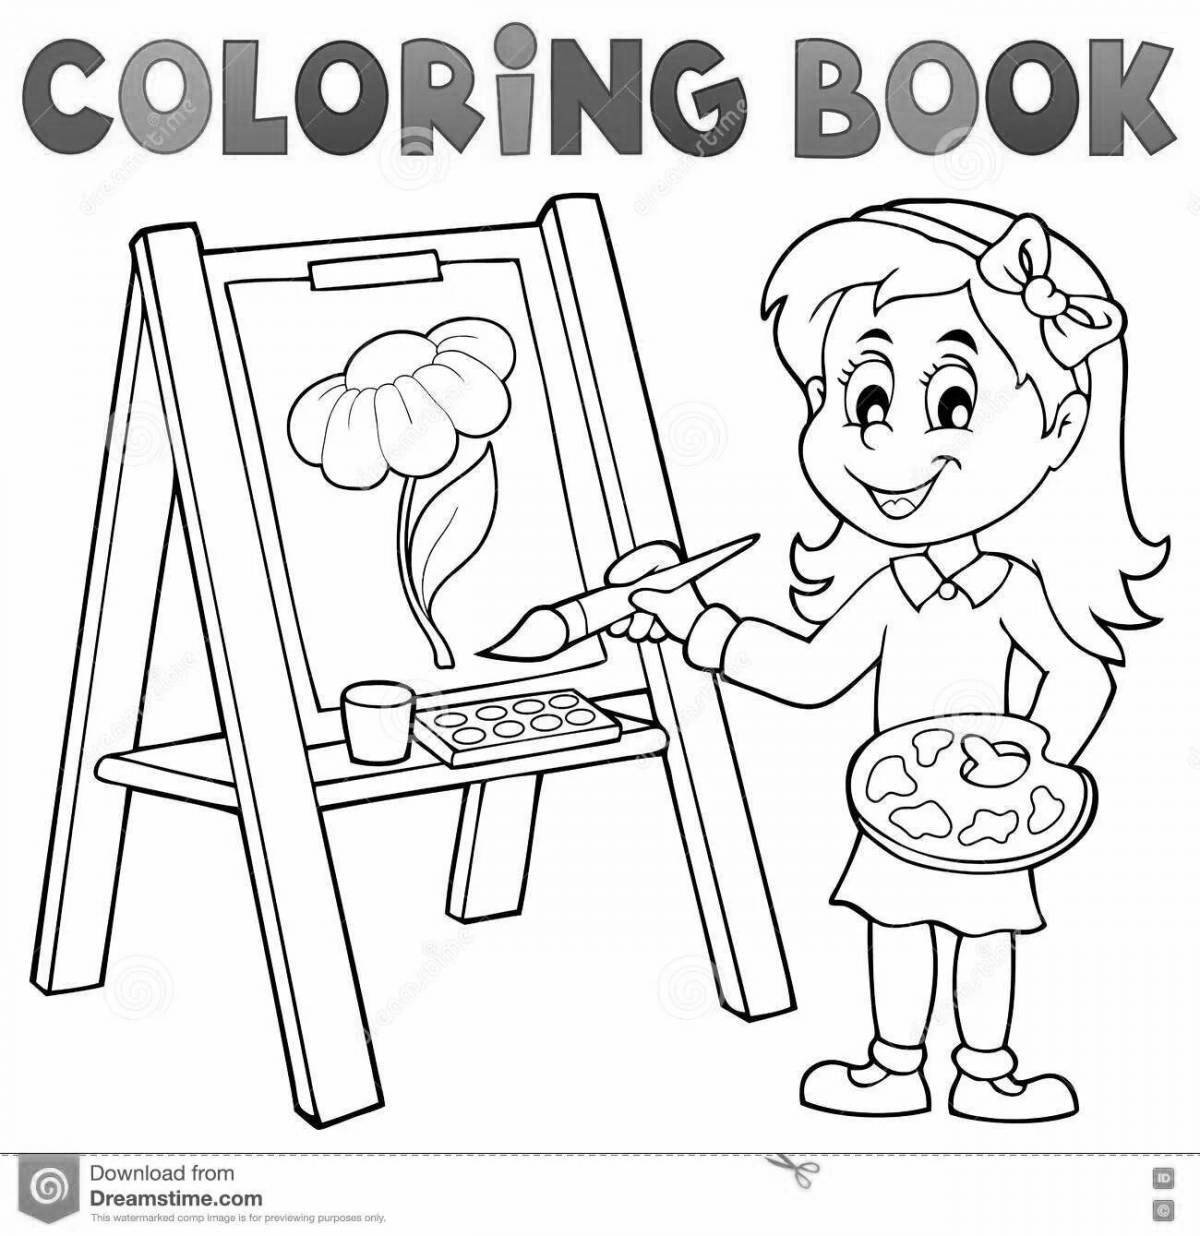 Coloring easel with shimmering colors